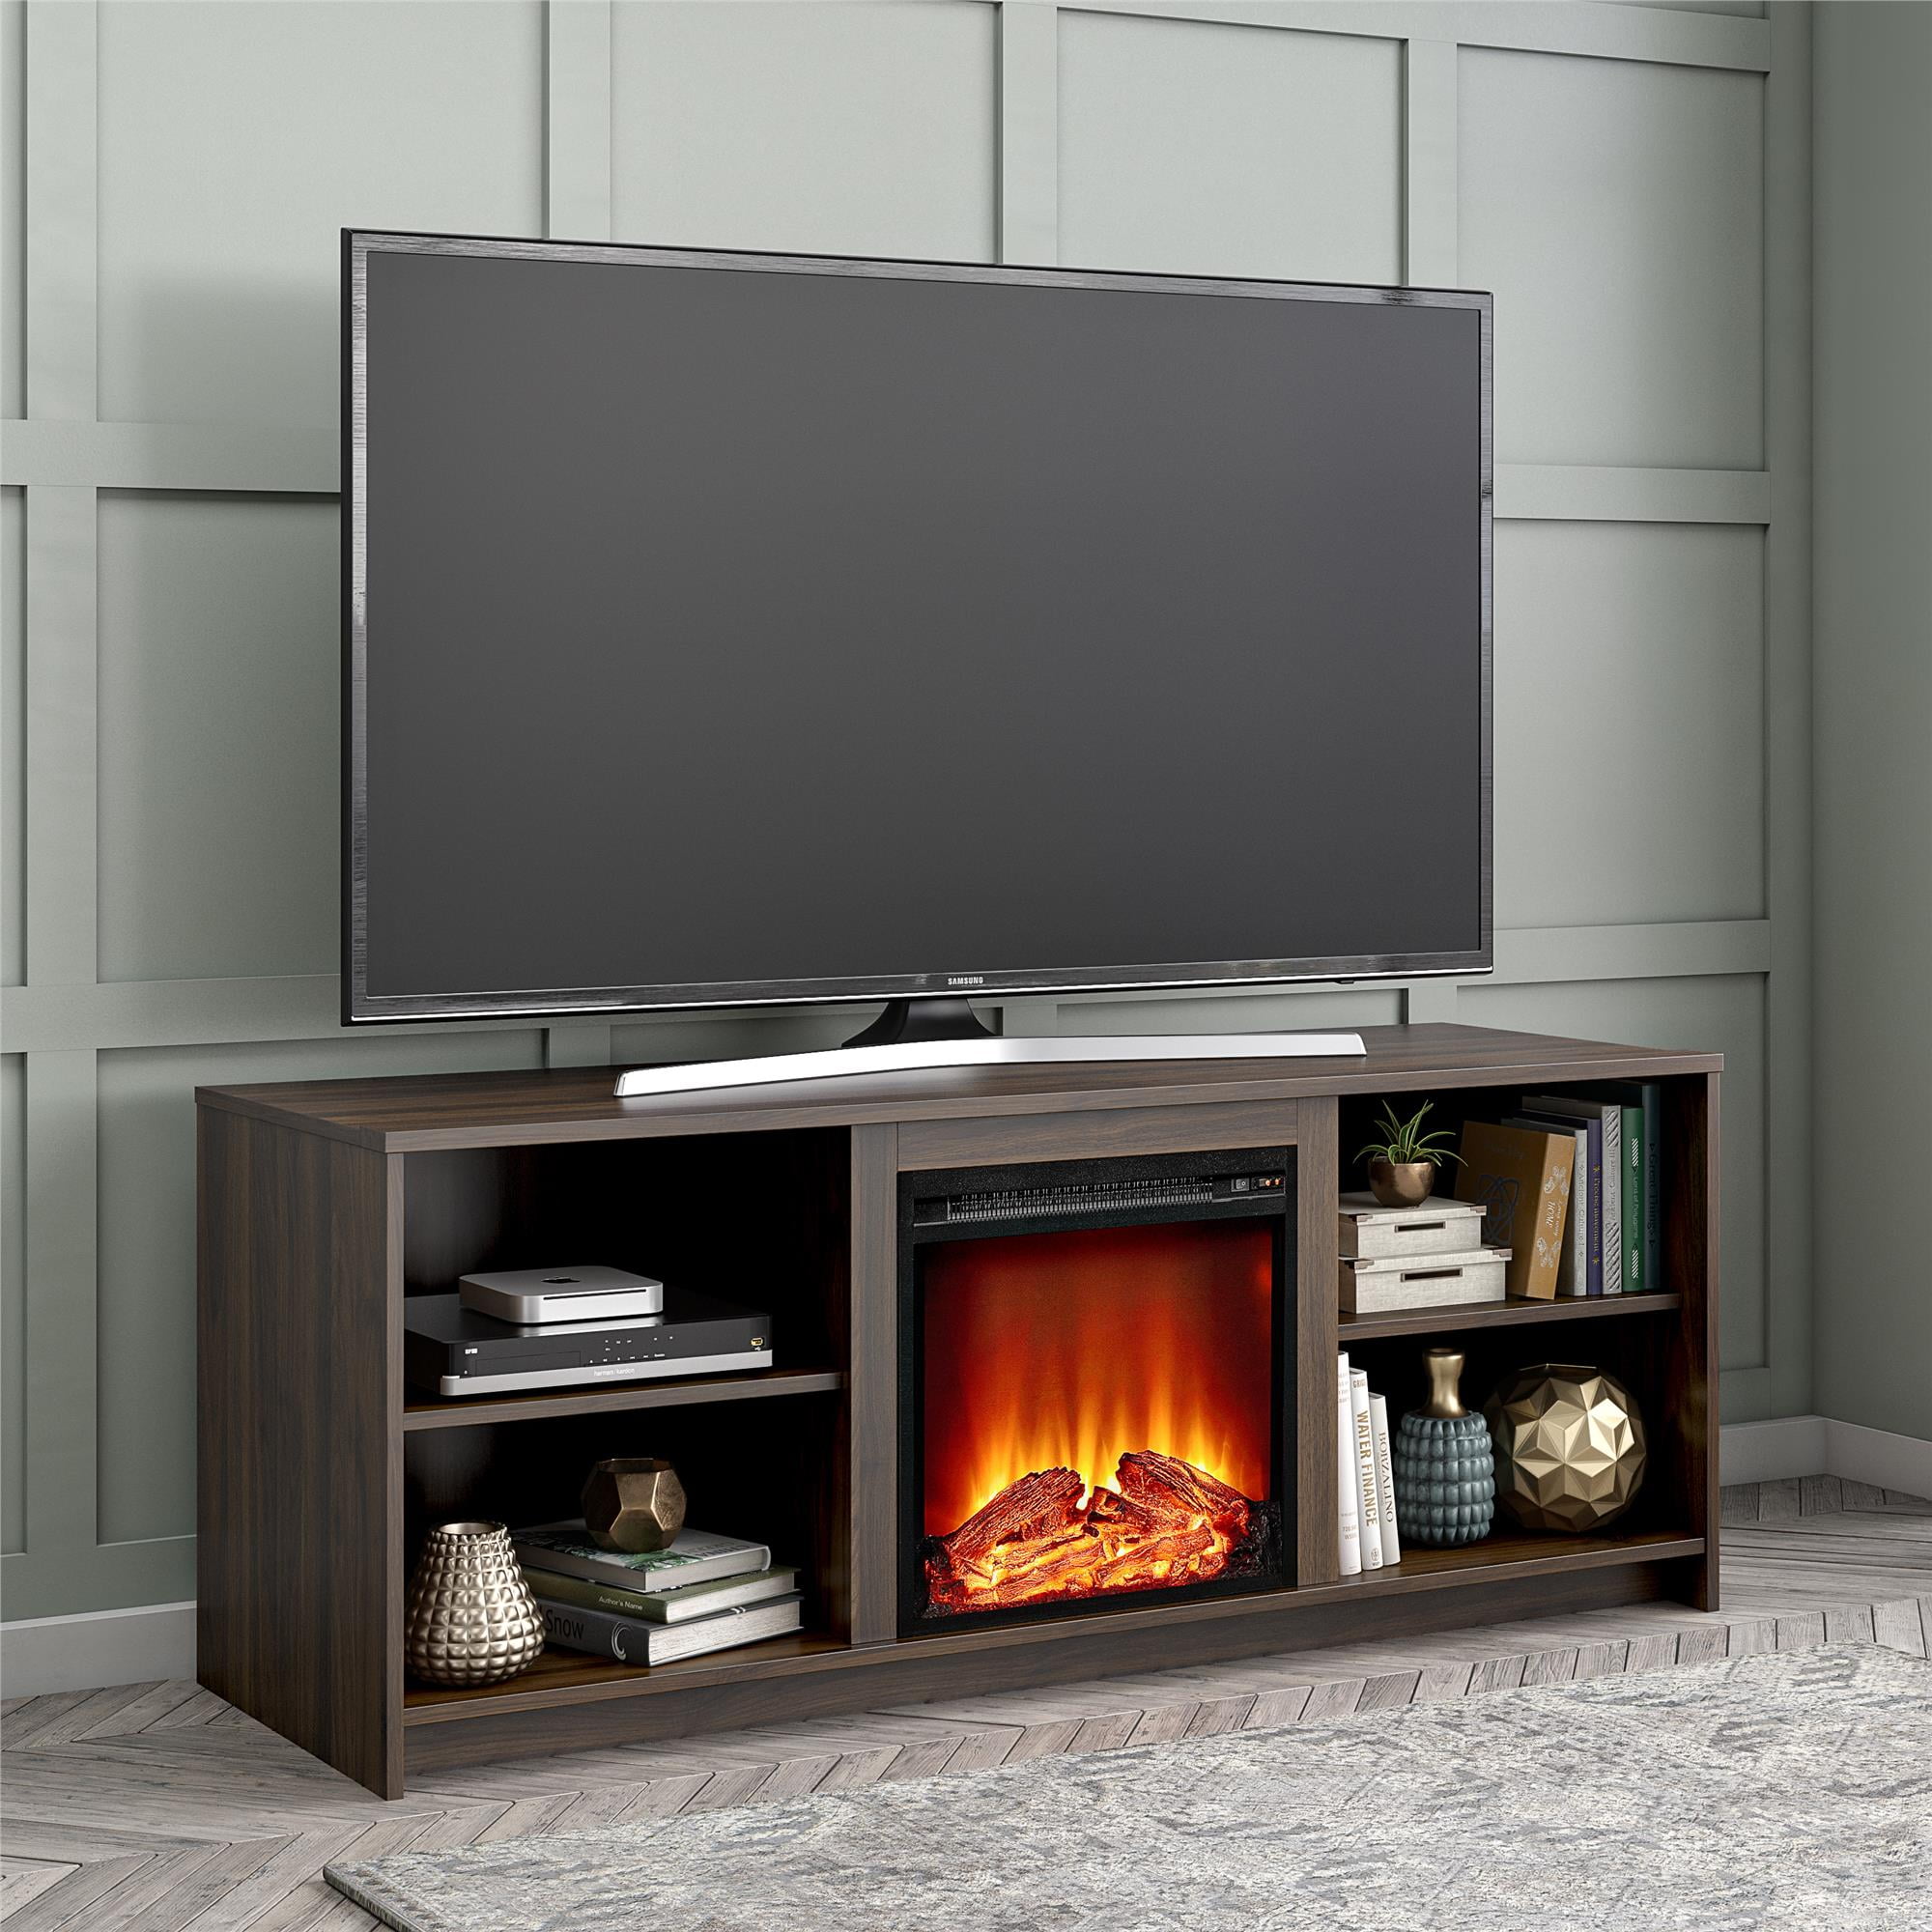 Mainstays Fireplace Tv Stand For Tvs Up, 65 Tv Stand With Built In Fireplace